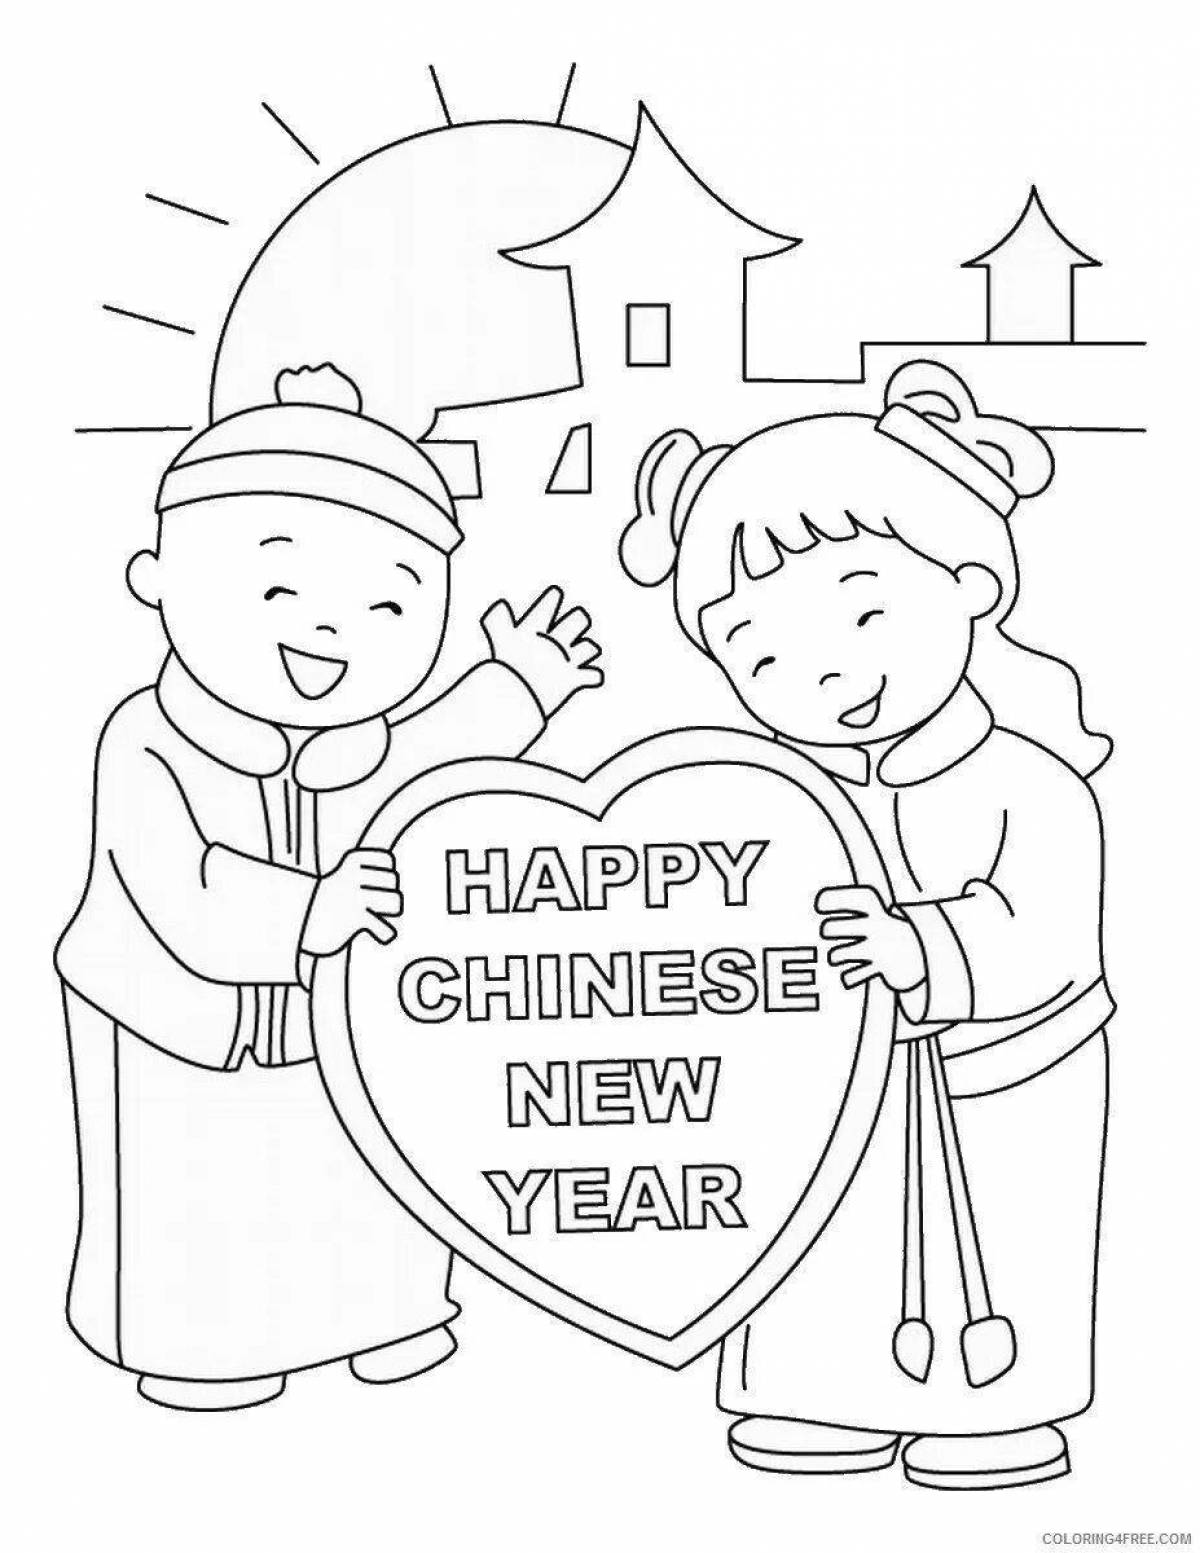 Chinese New Year for kids #6